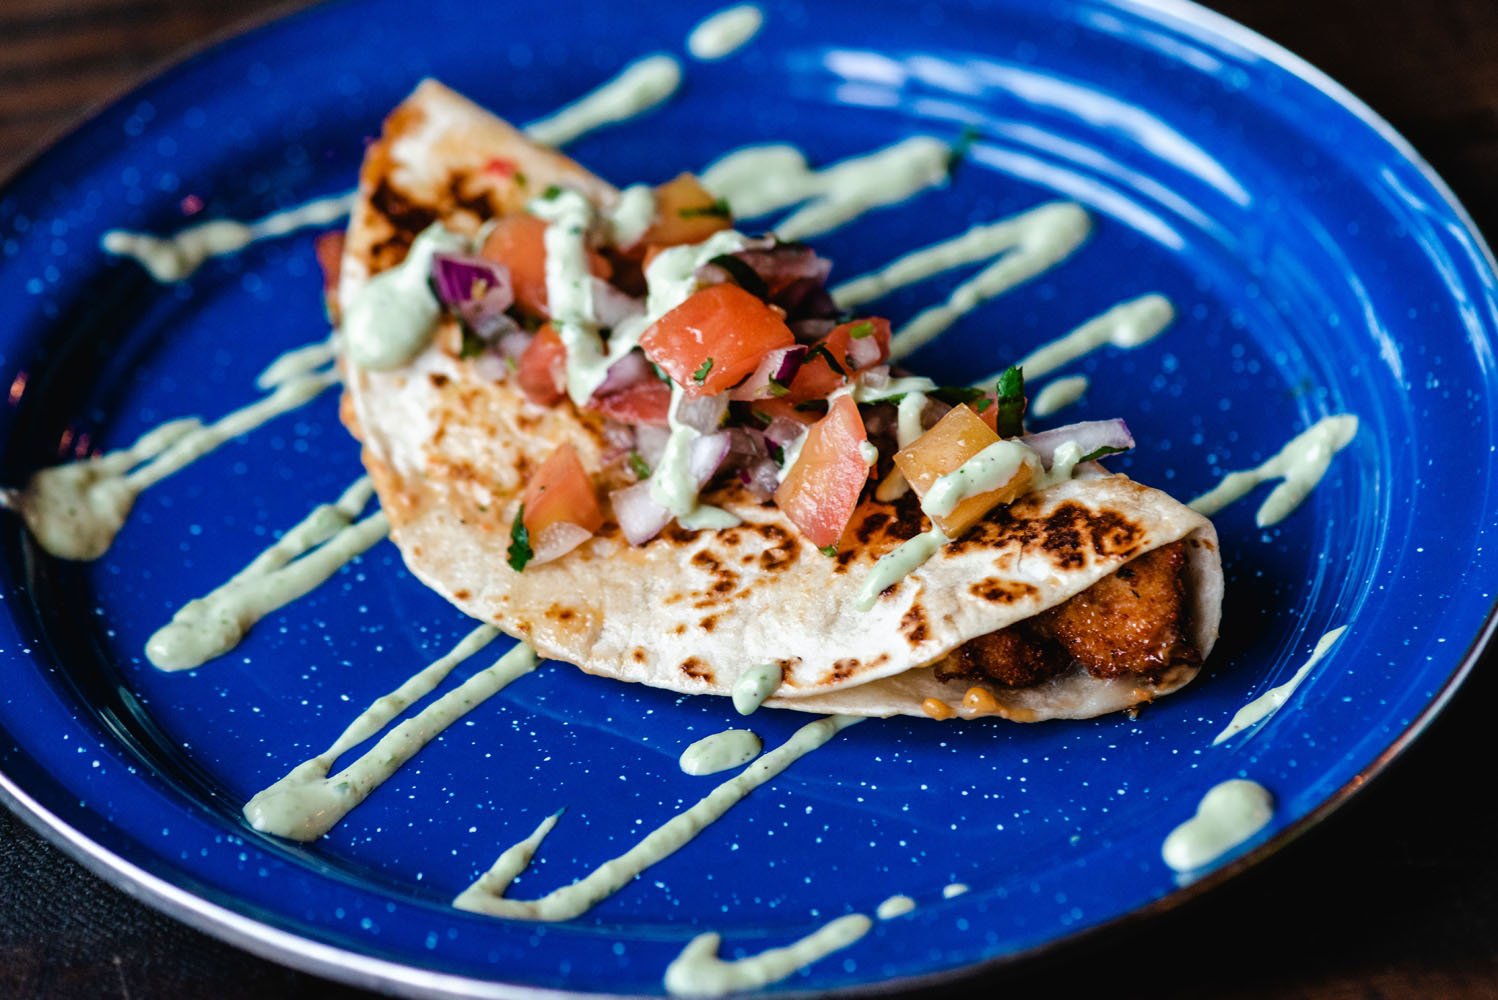 A taco with crispy filling, topped with diced tomatoes, onions, and cilantro, drizzled with a creamy sauce on a vibrant blue plate.